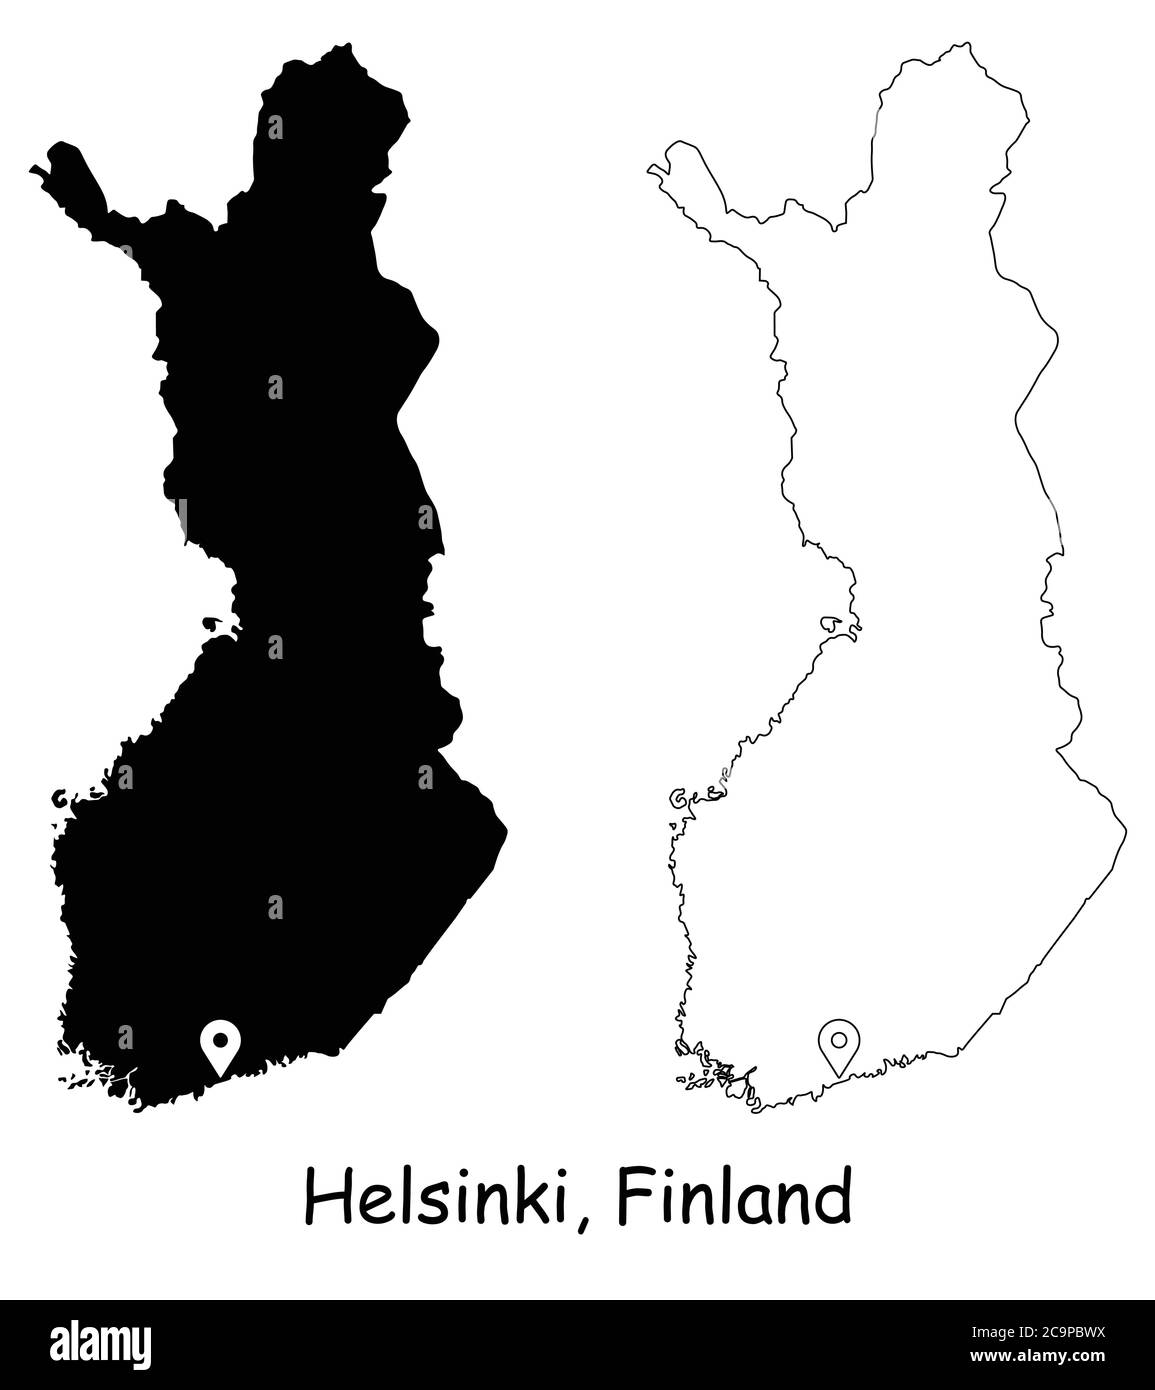 Helsinki Finland. Detailed Country Map with Location Pin on Capital City. Black silhouette and outline maps isolated on white background. EPS Vector Stock Vector